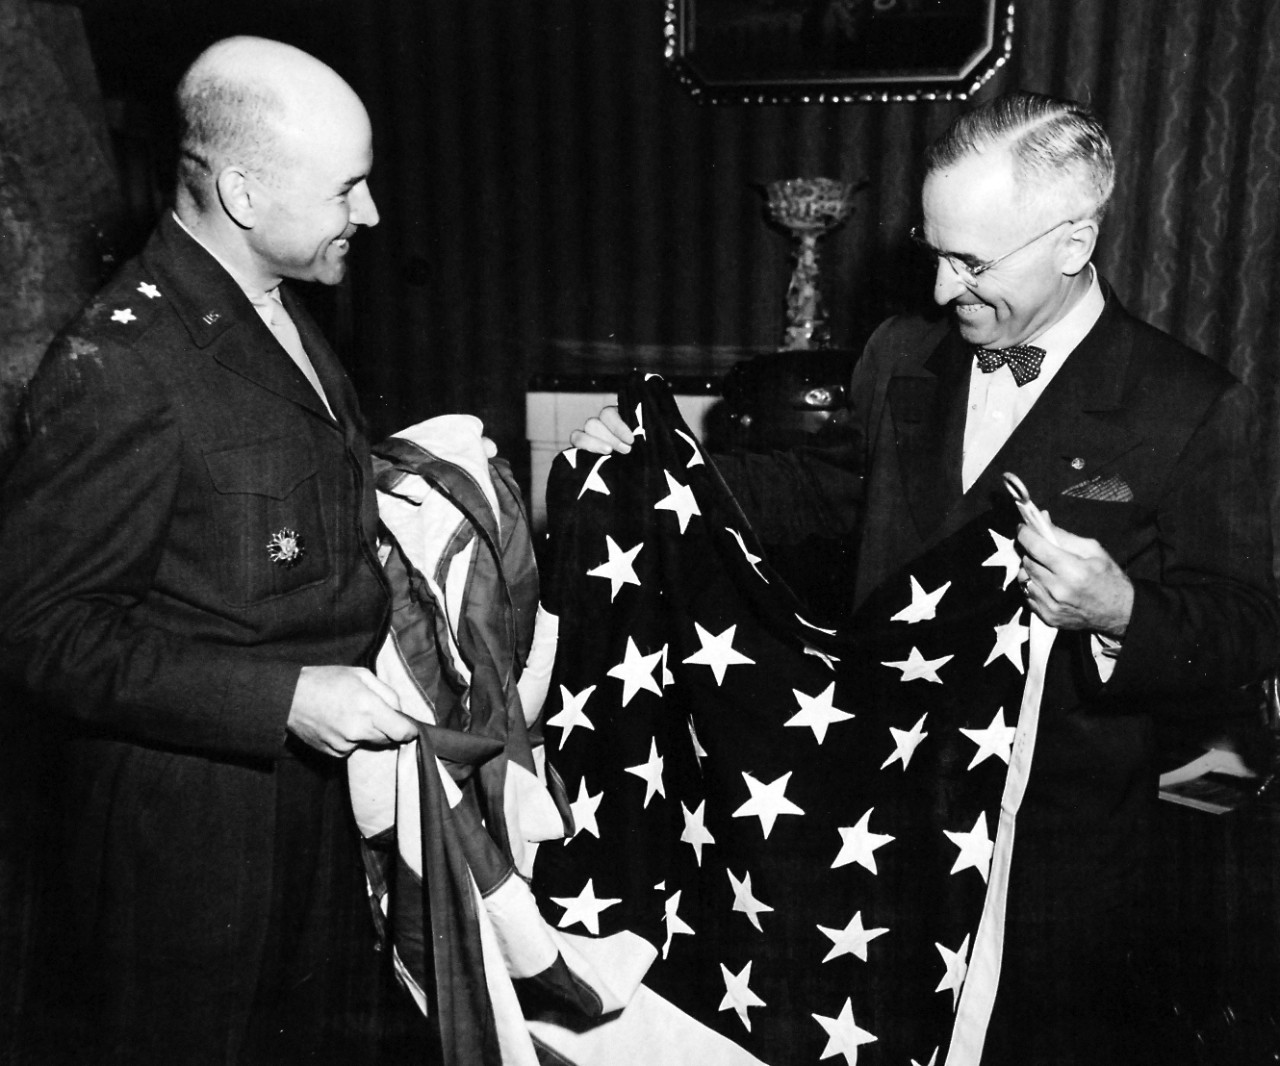 80-G-700073:  U.S. Navy in Germany, 1945.   Major General Floyd L. Parks, USA, CO of U.S. Headquarters Berlin presents 1st American Flag to fly over Berlin, Germany, to President Harry S. Truman at the “Little White House” at Postdam, Germany, July 23, 1945.   Official U.S. Navy photograph, now in the collections of the National Archives.  (2017/02/14).  